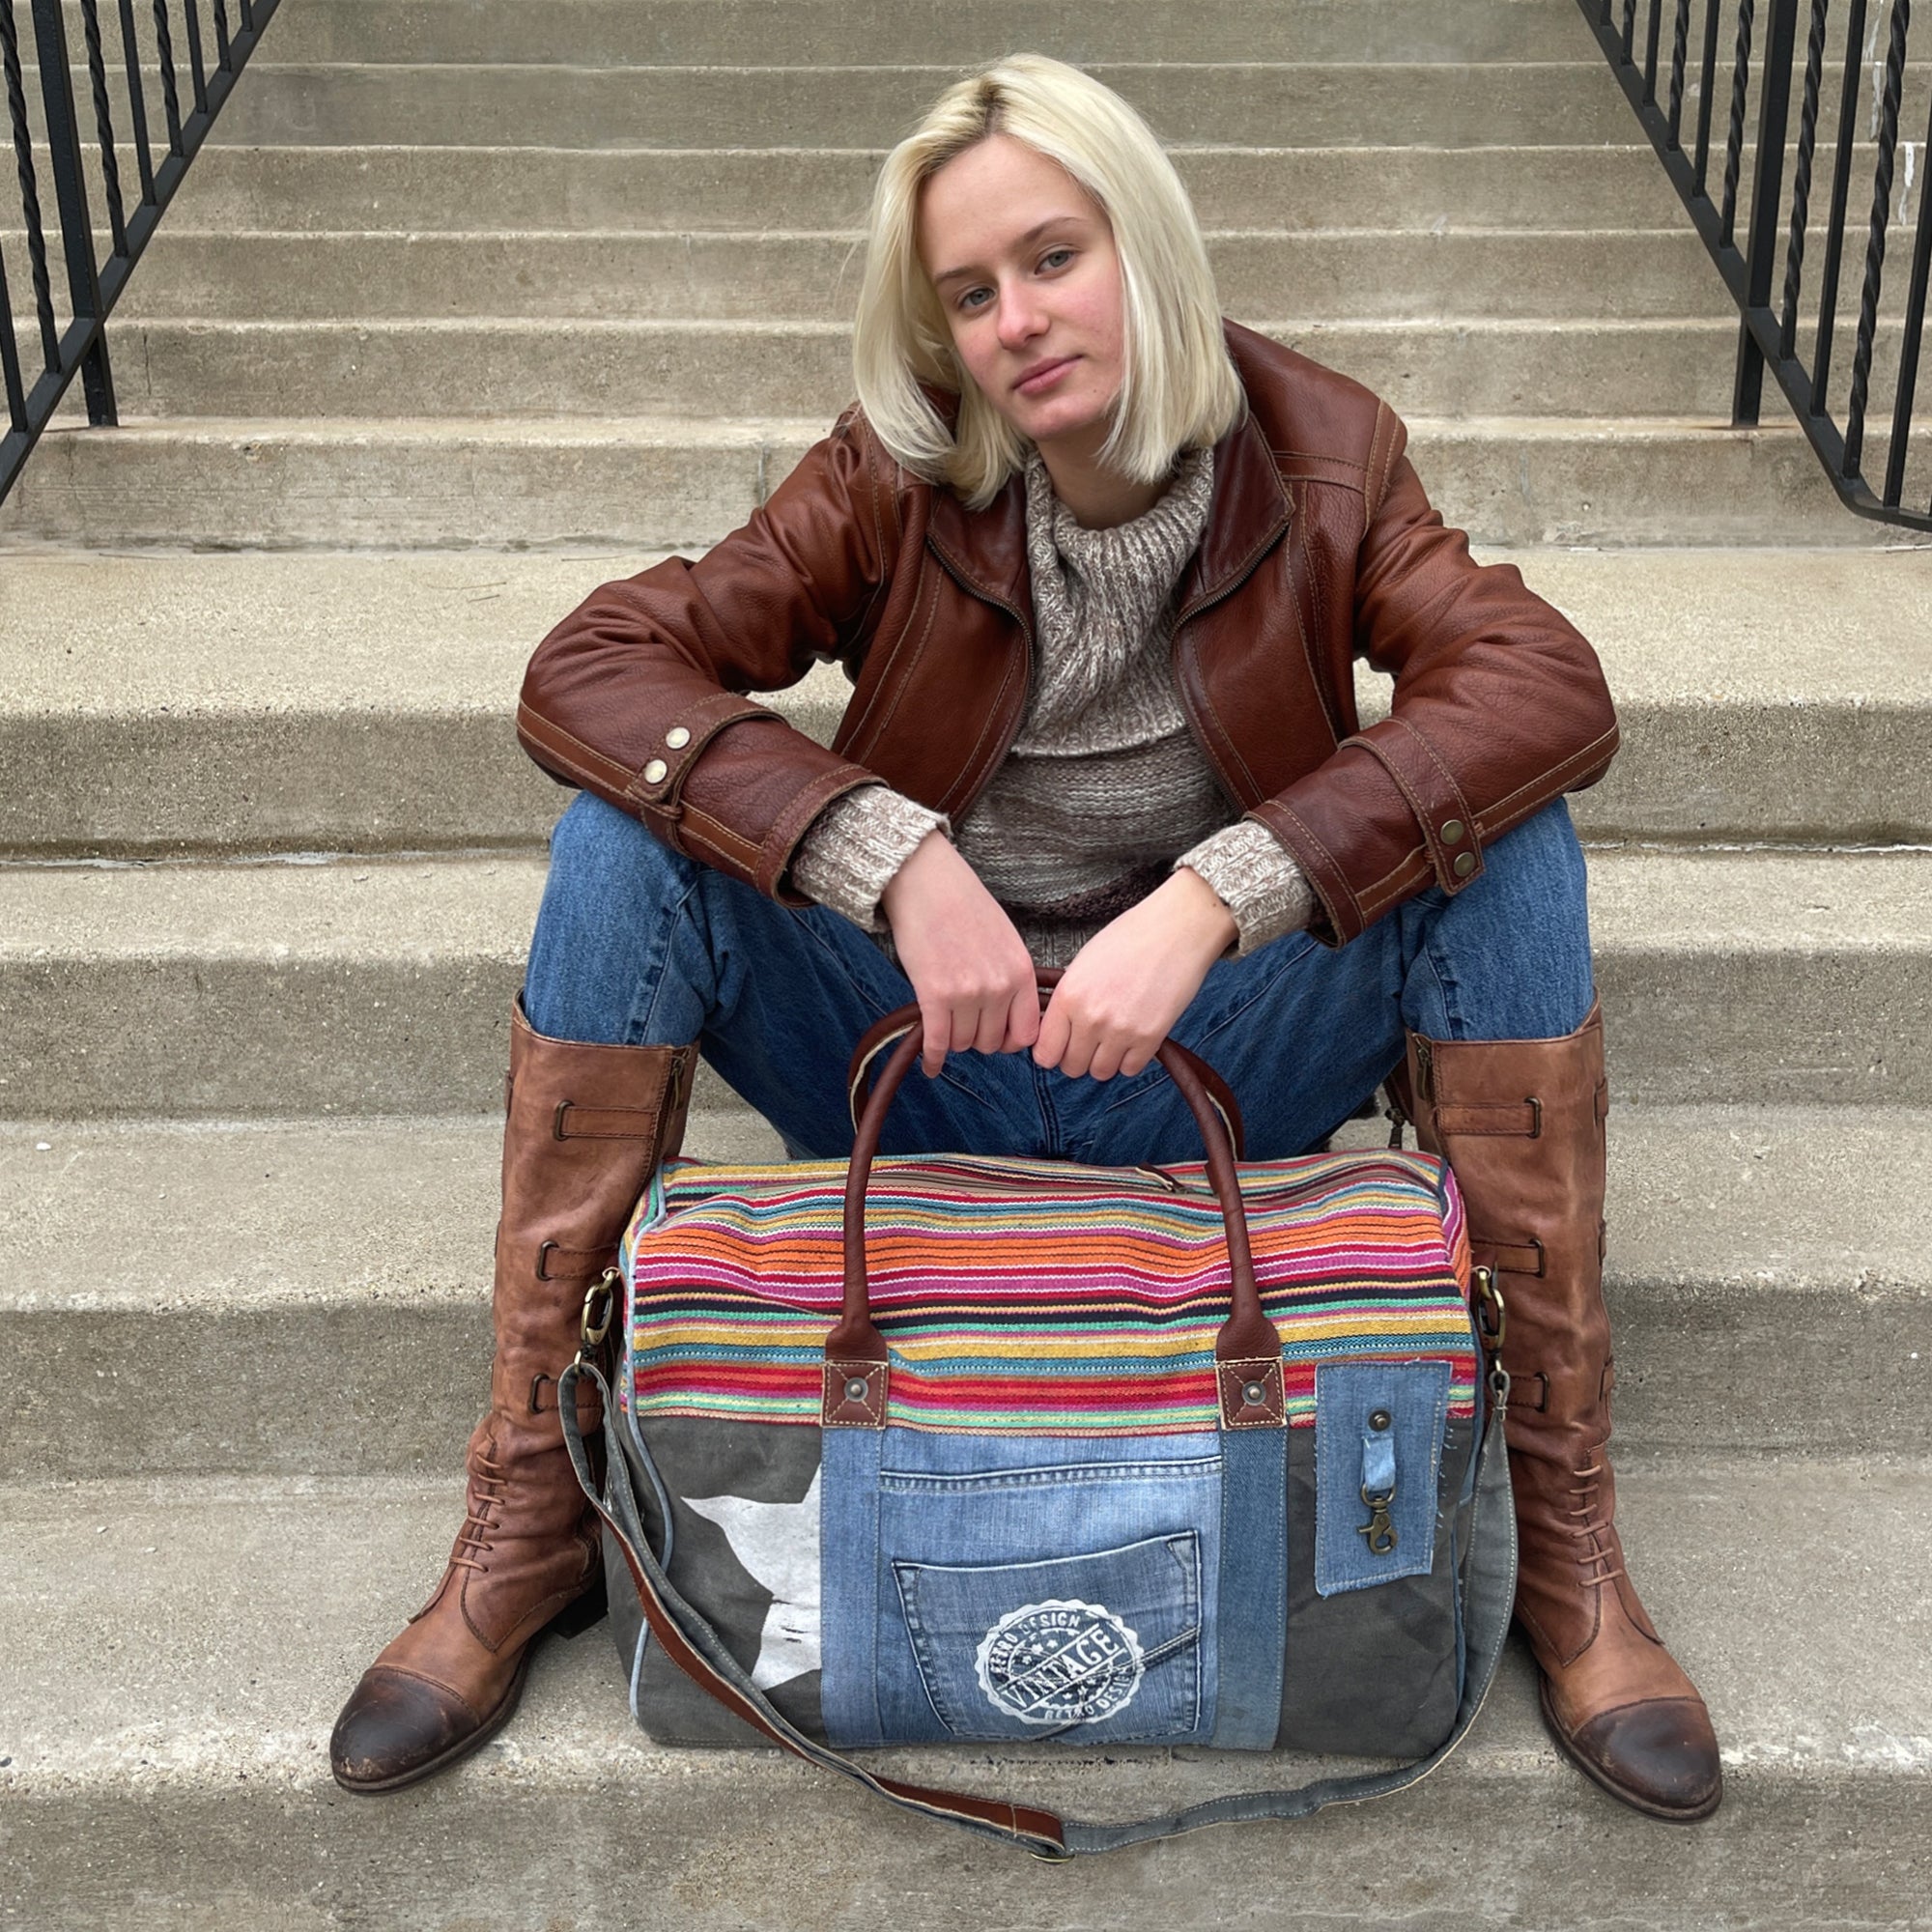 Women's Duffle & Travel Bags Collection